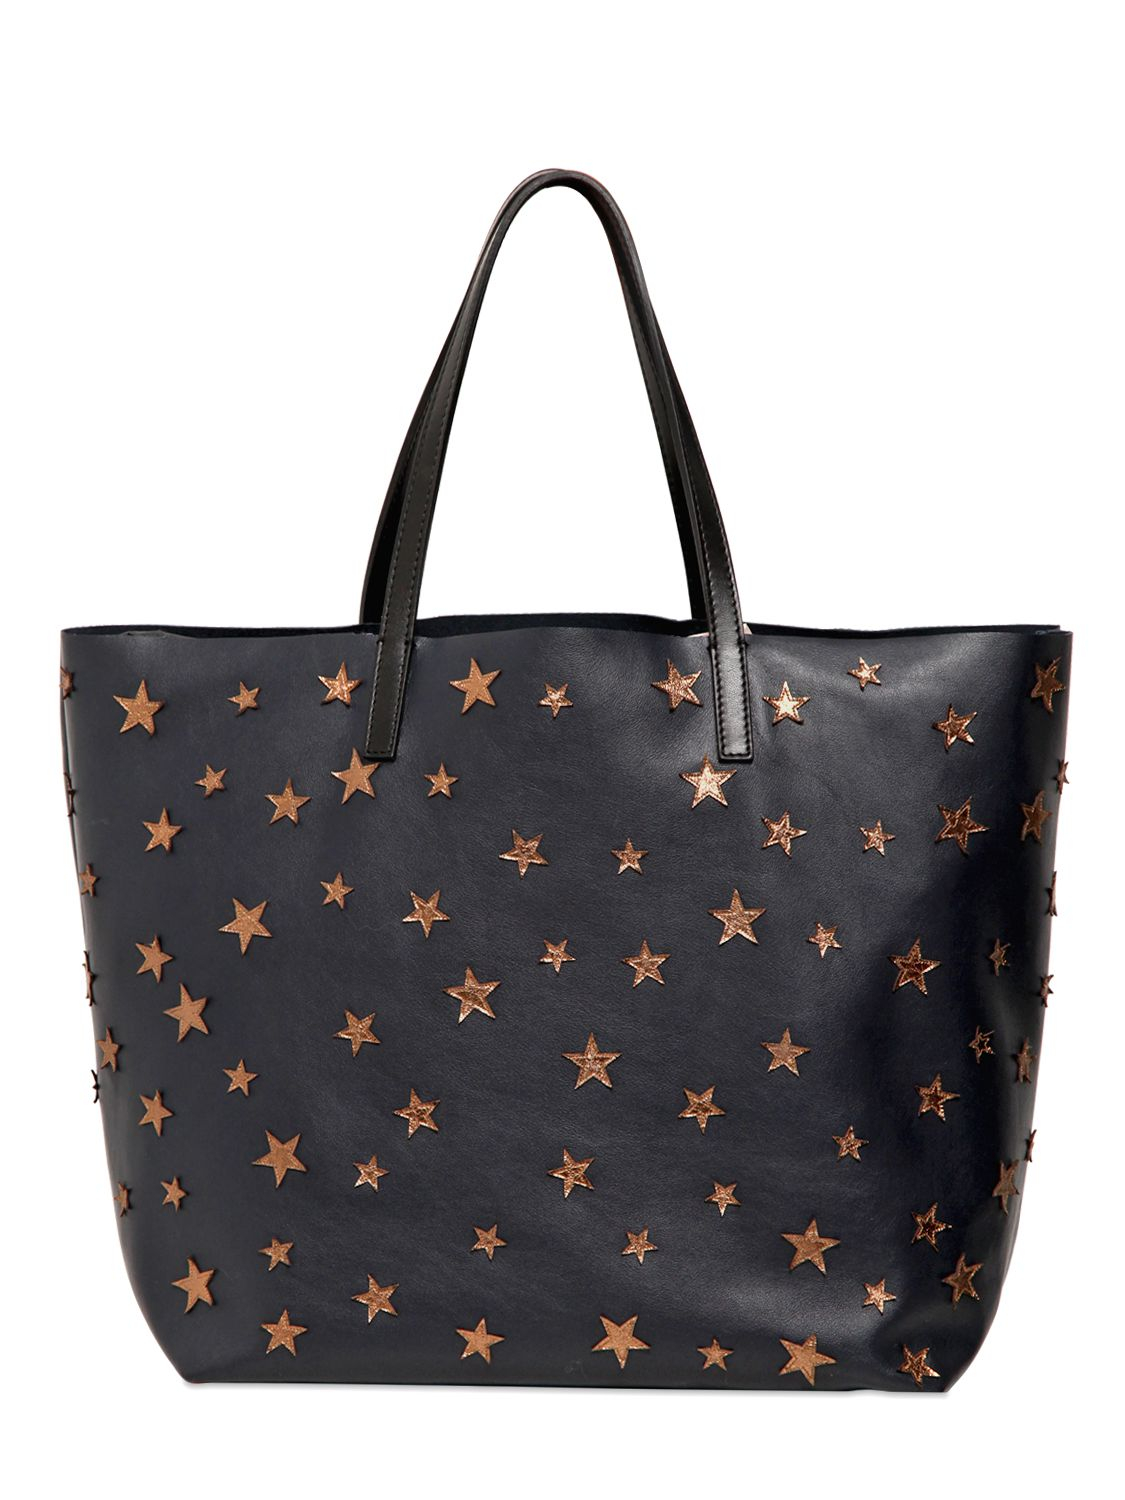 Lyst - Red Valentino Laminated Star Appliqué Leather Tote Bag in Blue